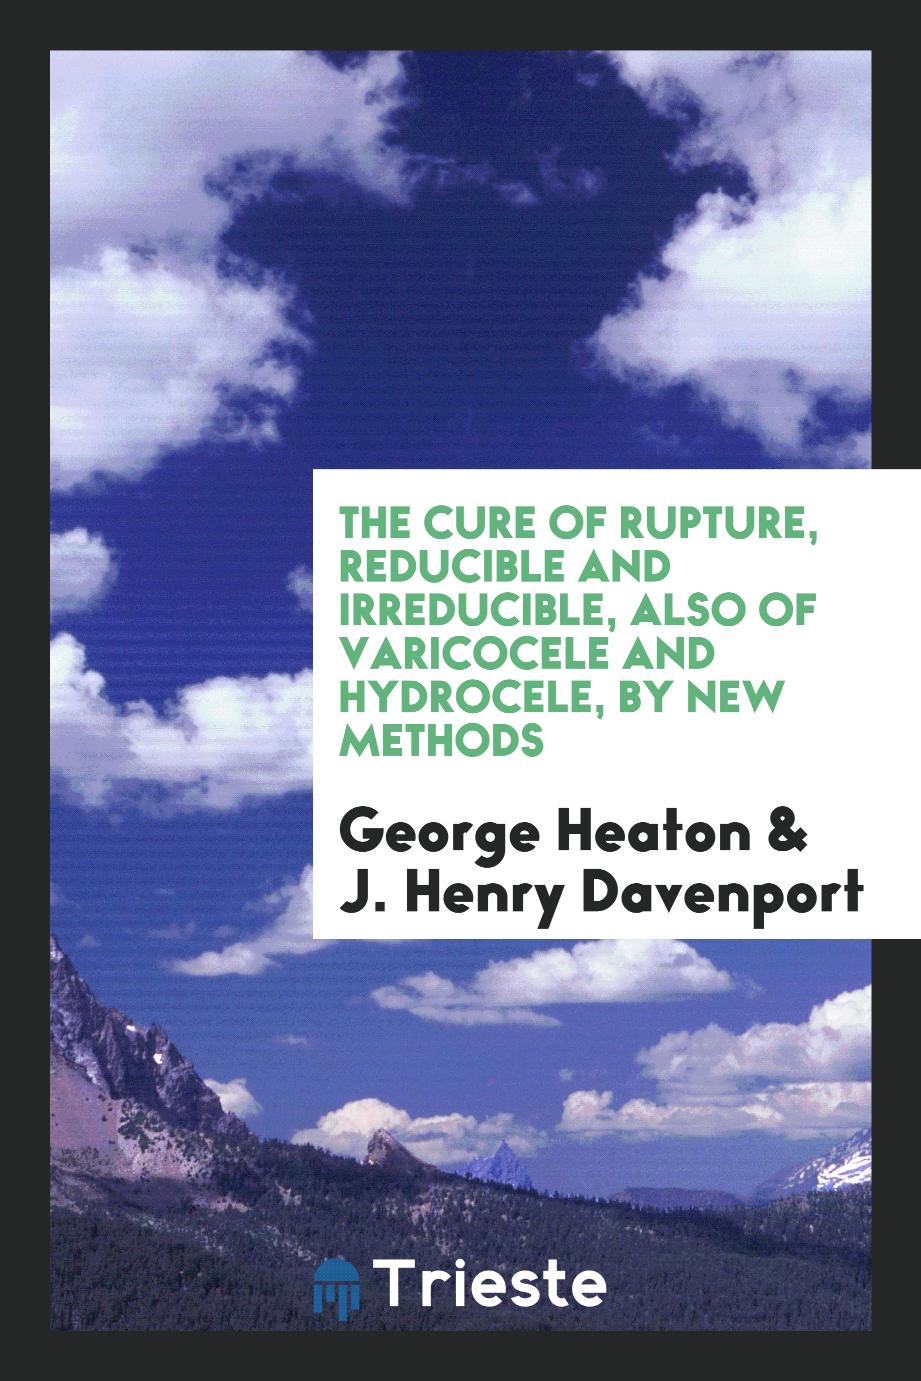 The Cure of Rupture, Reducible and Irreducible, Also of Varicocele and Hydrocele, by New Methods